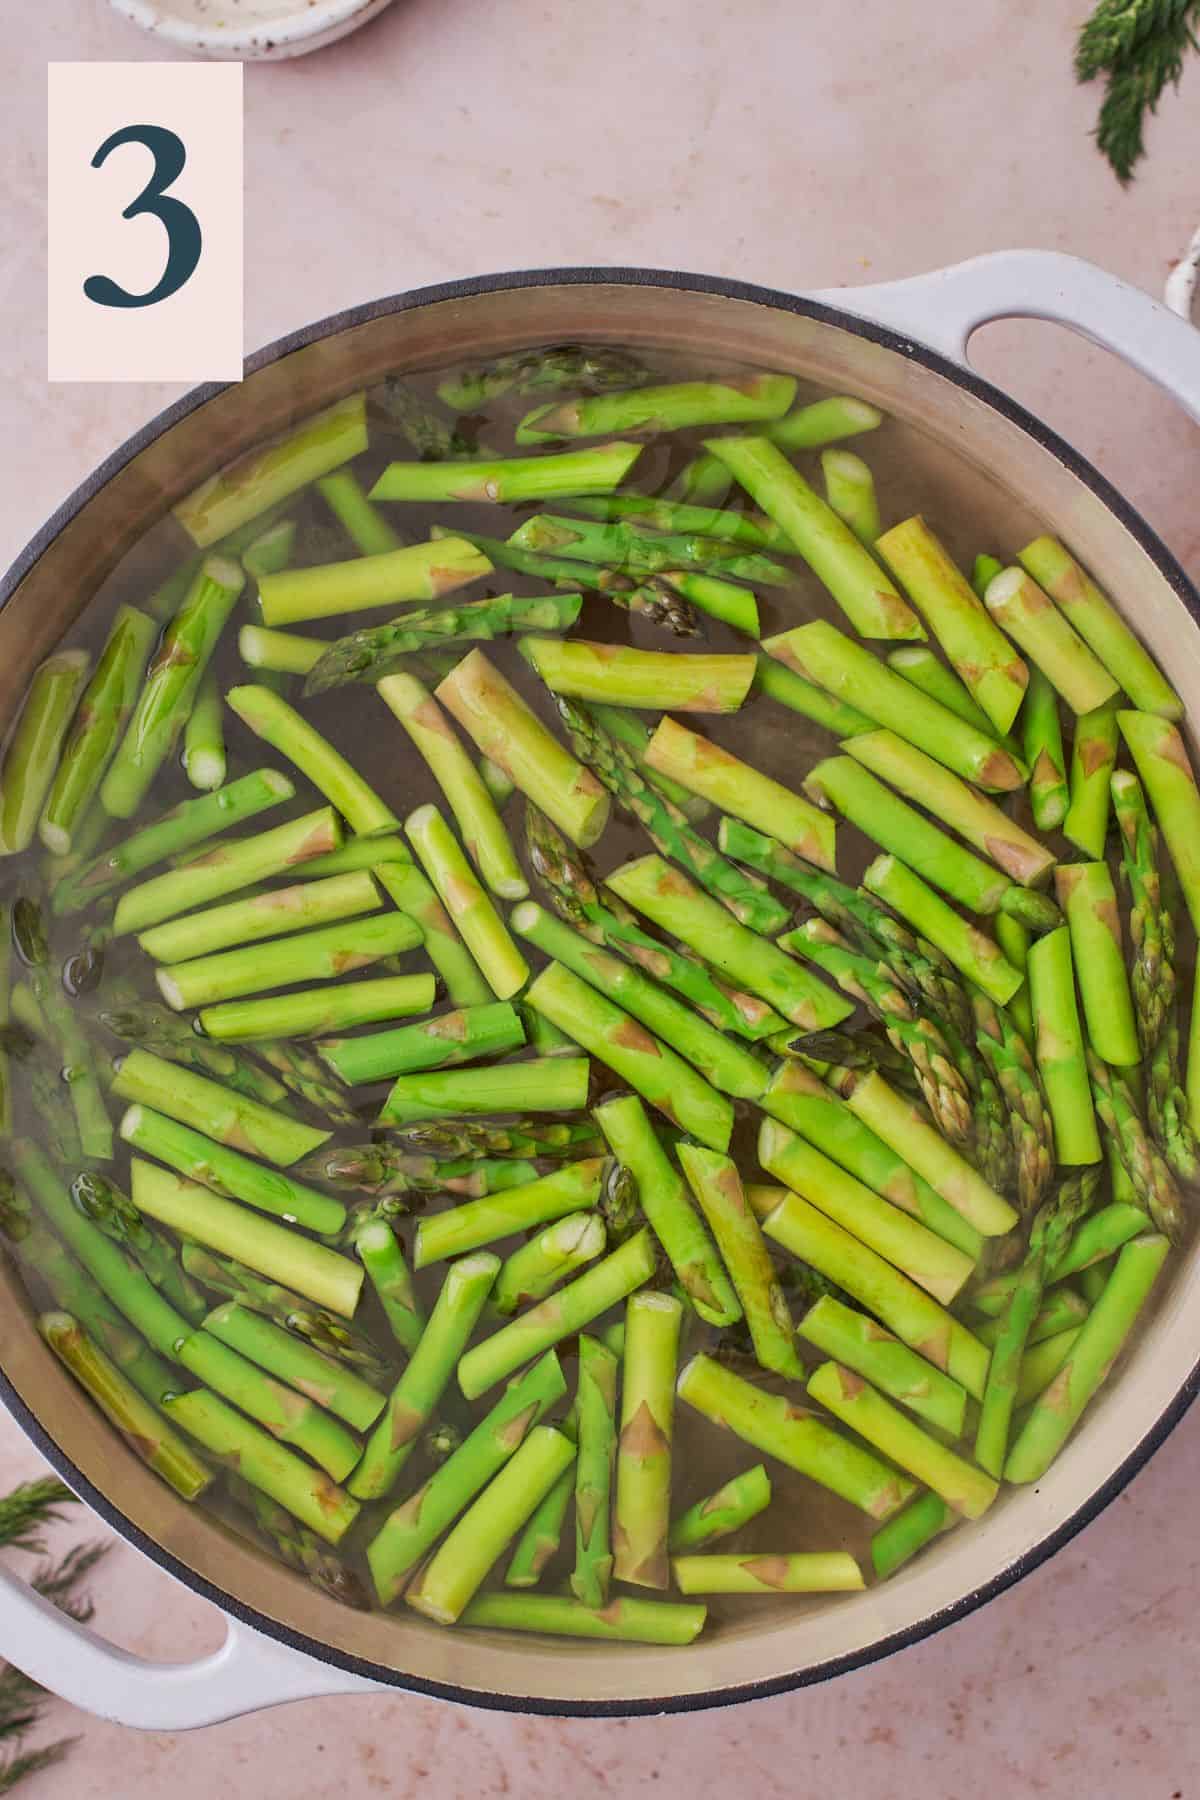 Boiling small asparagus pieces in a large pot.